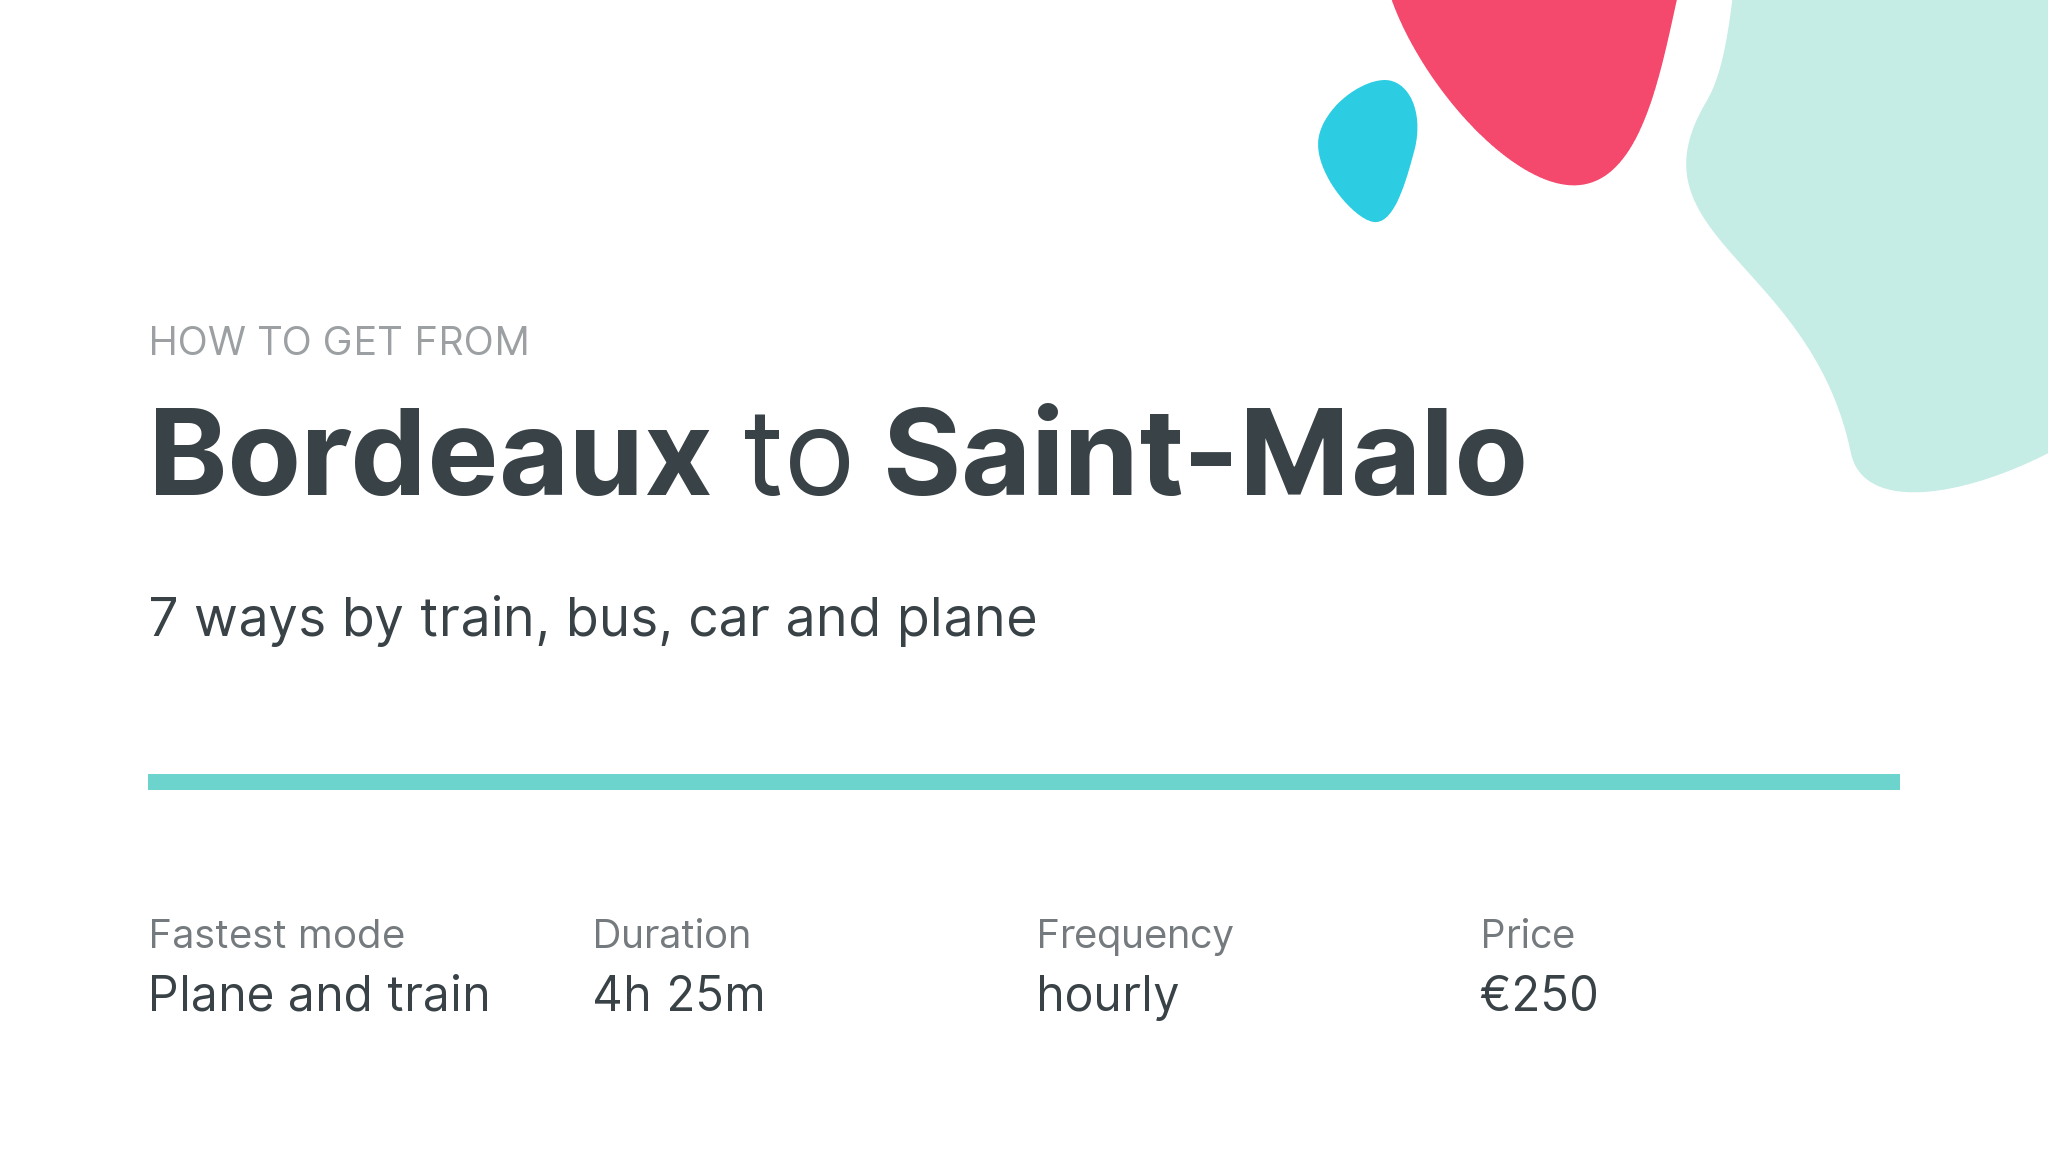 How do I get from Bordeaux to Saint-Malo